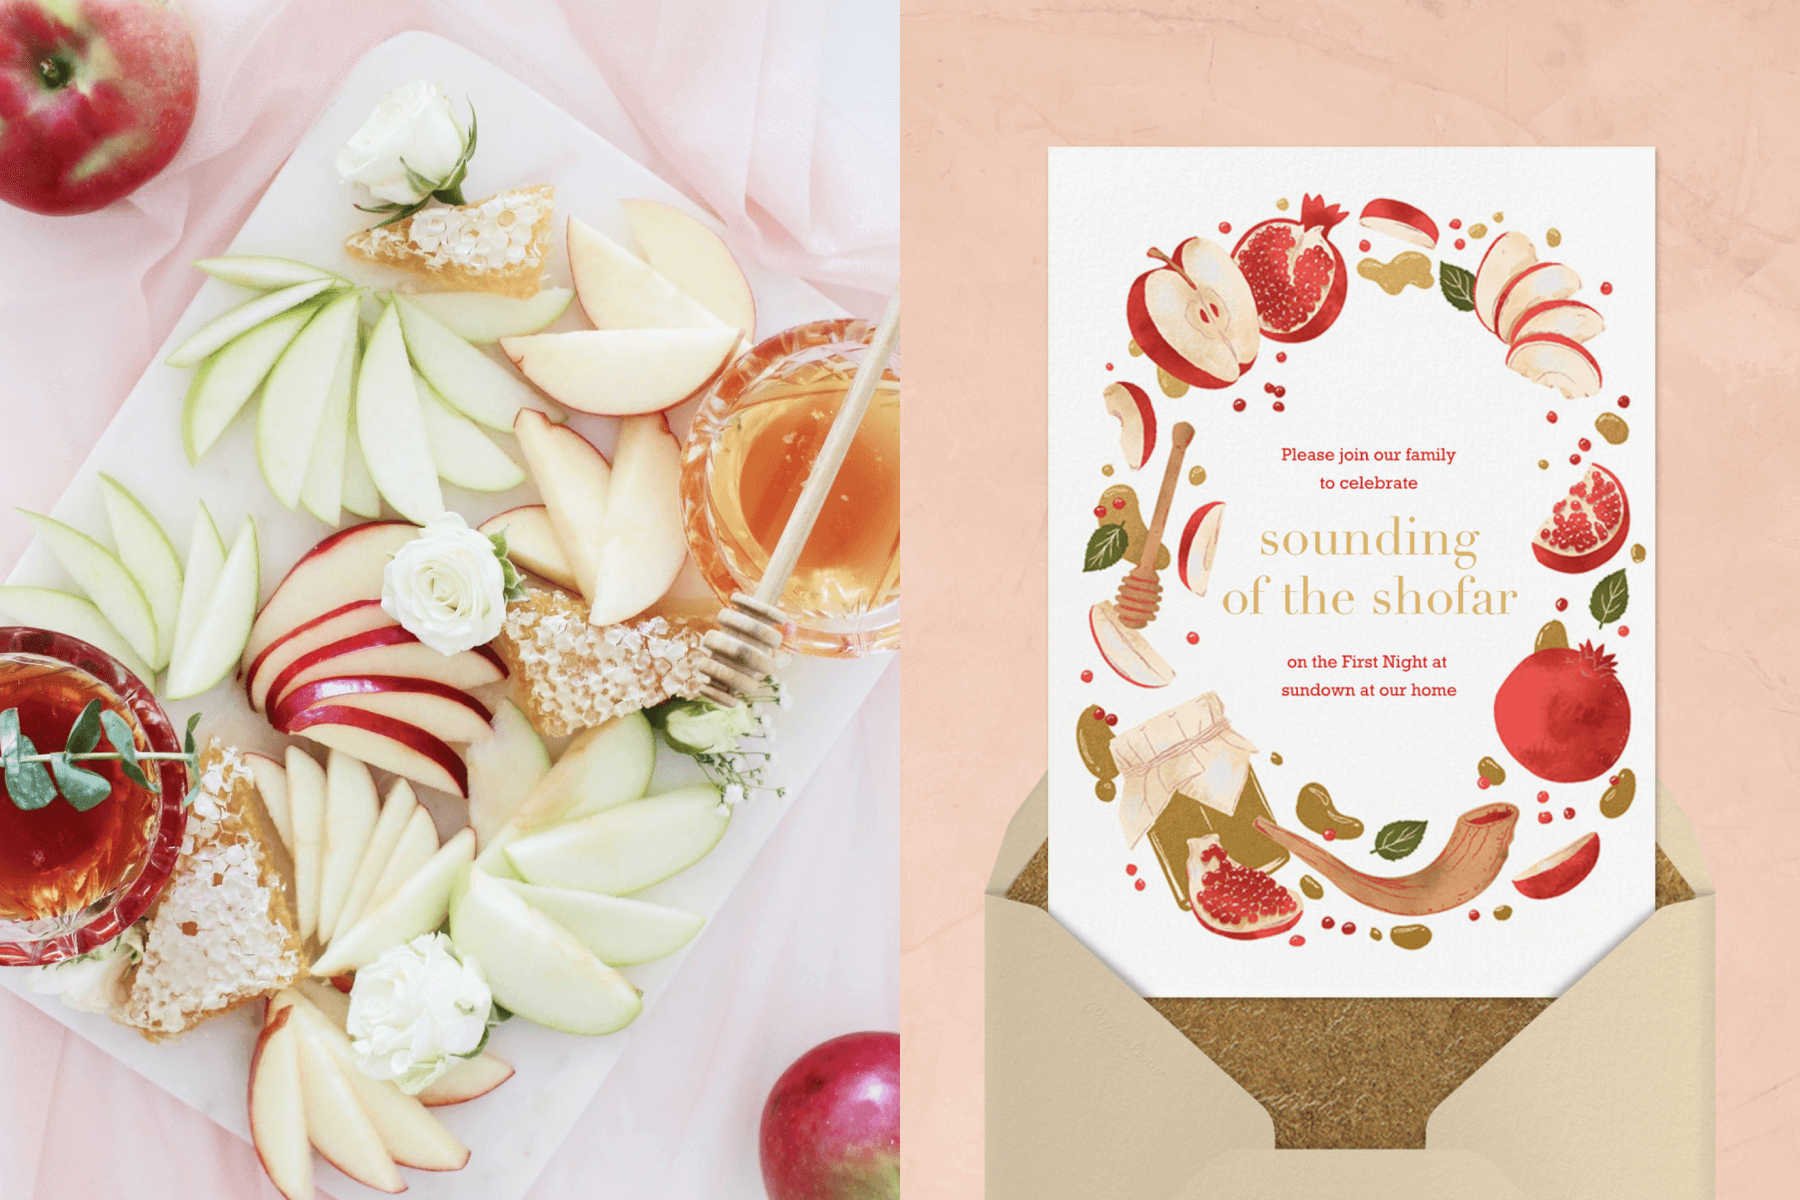 Left: A platter of apple slices and pots of honey. Right: A Rosh Hashanah invitation with apple slices, pomegranates, honey, and a shofar.